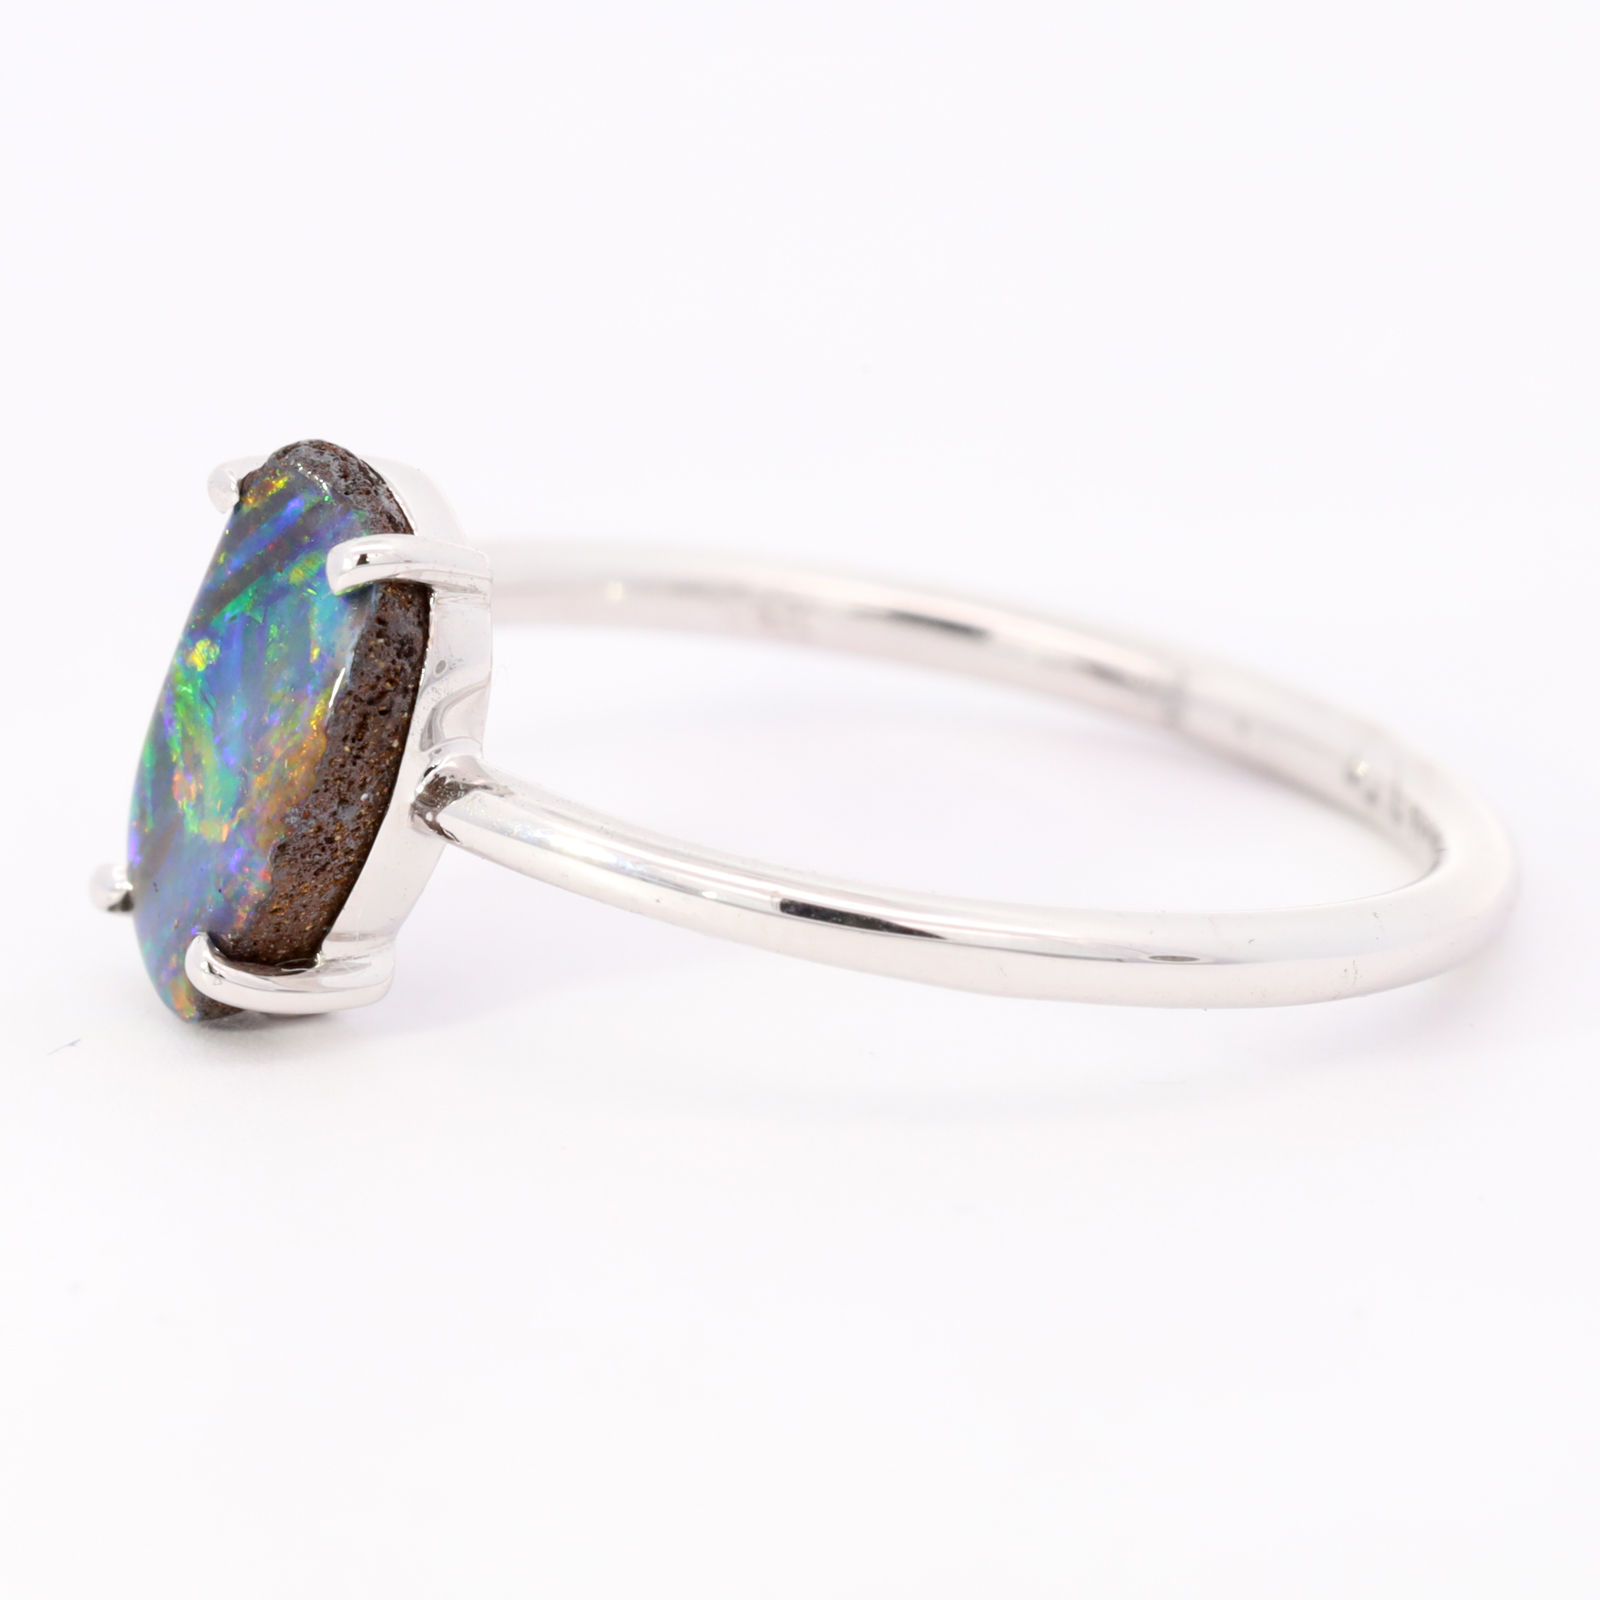 White Gold Blue Green Red Yellow Orange Solid Australian Boulder Opal Engagement Ring